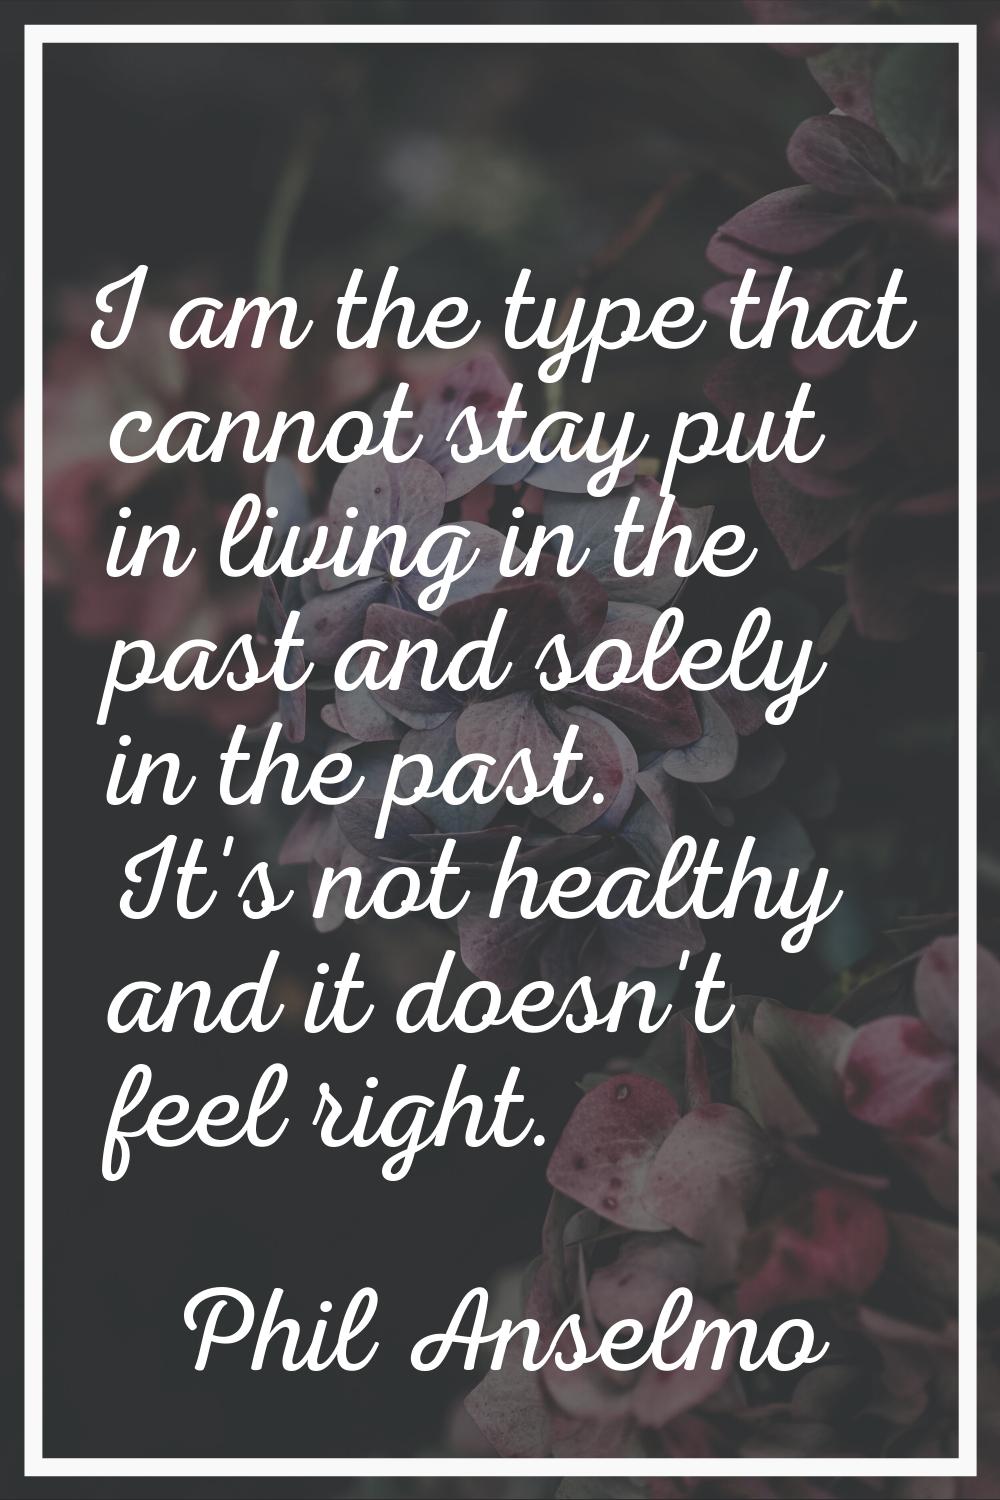 I am the type that cannot stay put in living in the past and solely in the past. It's not healthy a